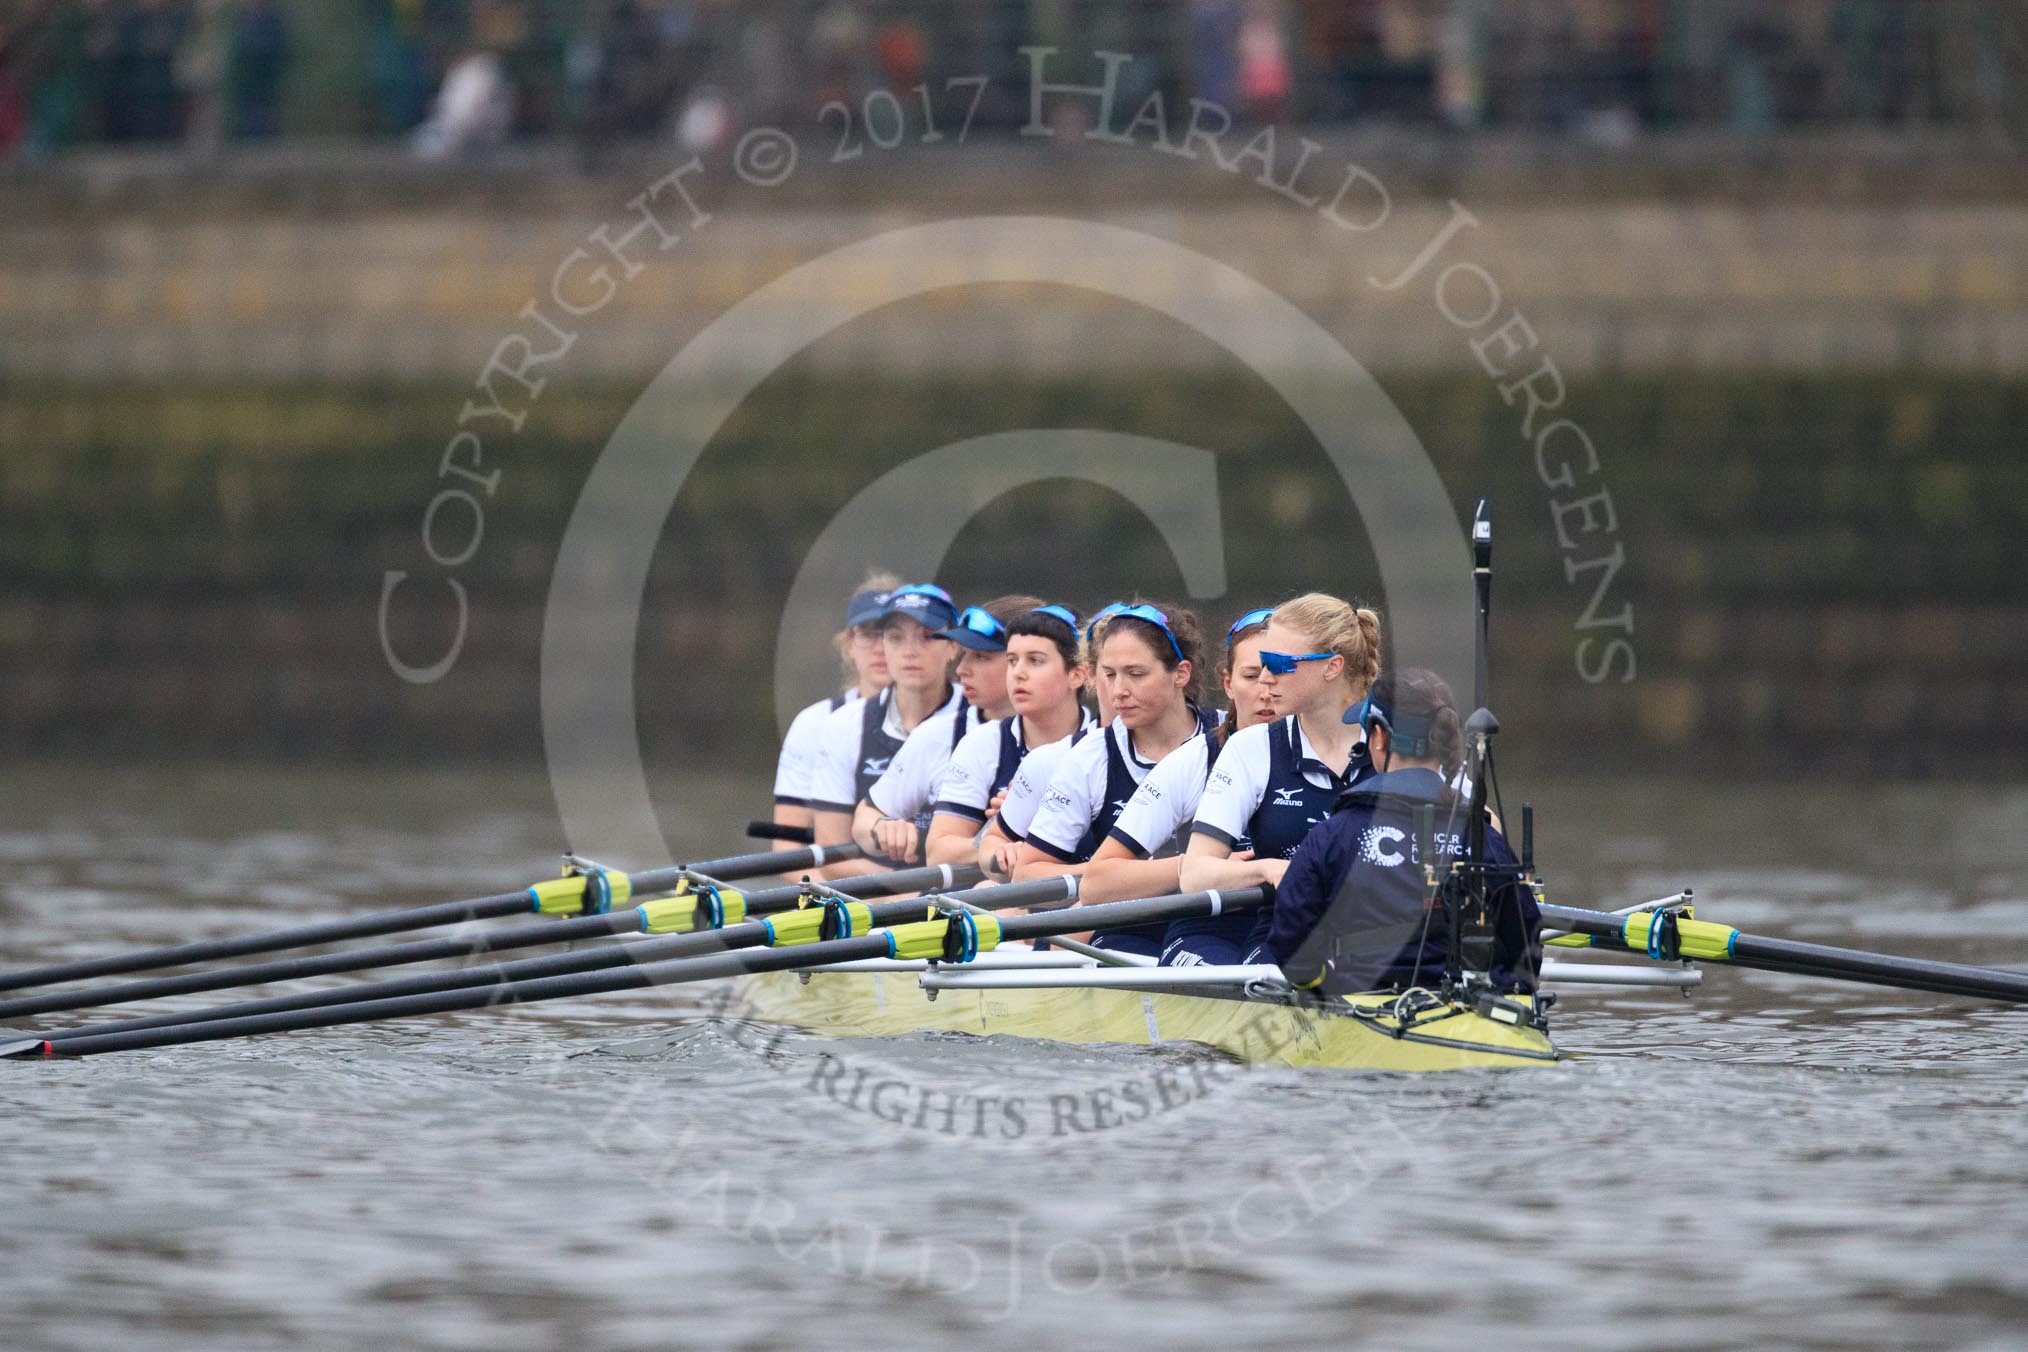 The Cancer Research UK Women's Boat Race 2018: The Oxford women getting ready for the start of the Women's Boat Race - bow Renée Koolschijn, 2 Katherine Erickson, 3 Juliette Perry, 4 Alice Roberts, 5 Morgan McGovern, 6 Sara Kushma, 7 Abigail Killen, stroke Beth Bridgman, cox Jessica Buck.
River Thames between Putney Bridge and Mortlake,
London SW15,

United Kingdom,
on 24 March 2018 at 16:22, image #147